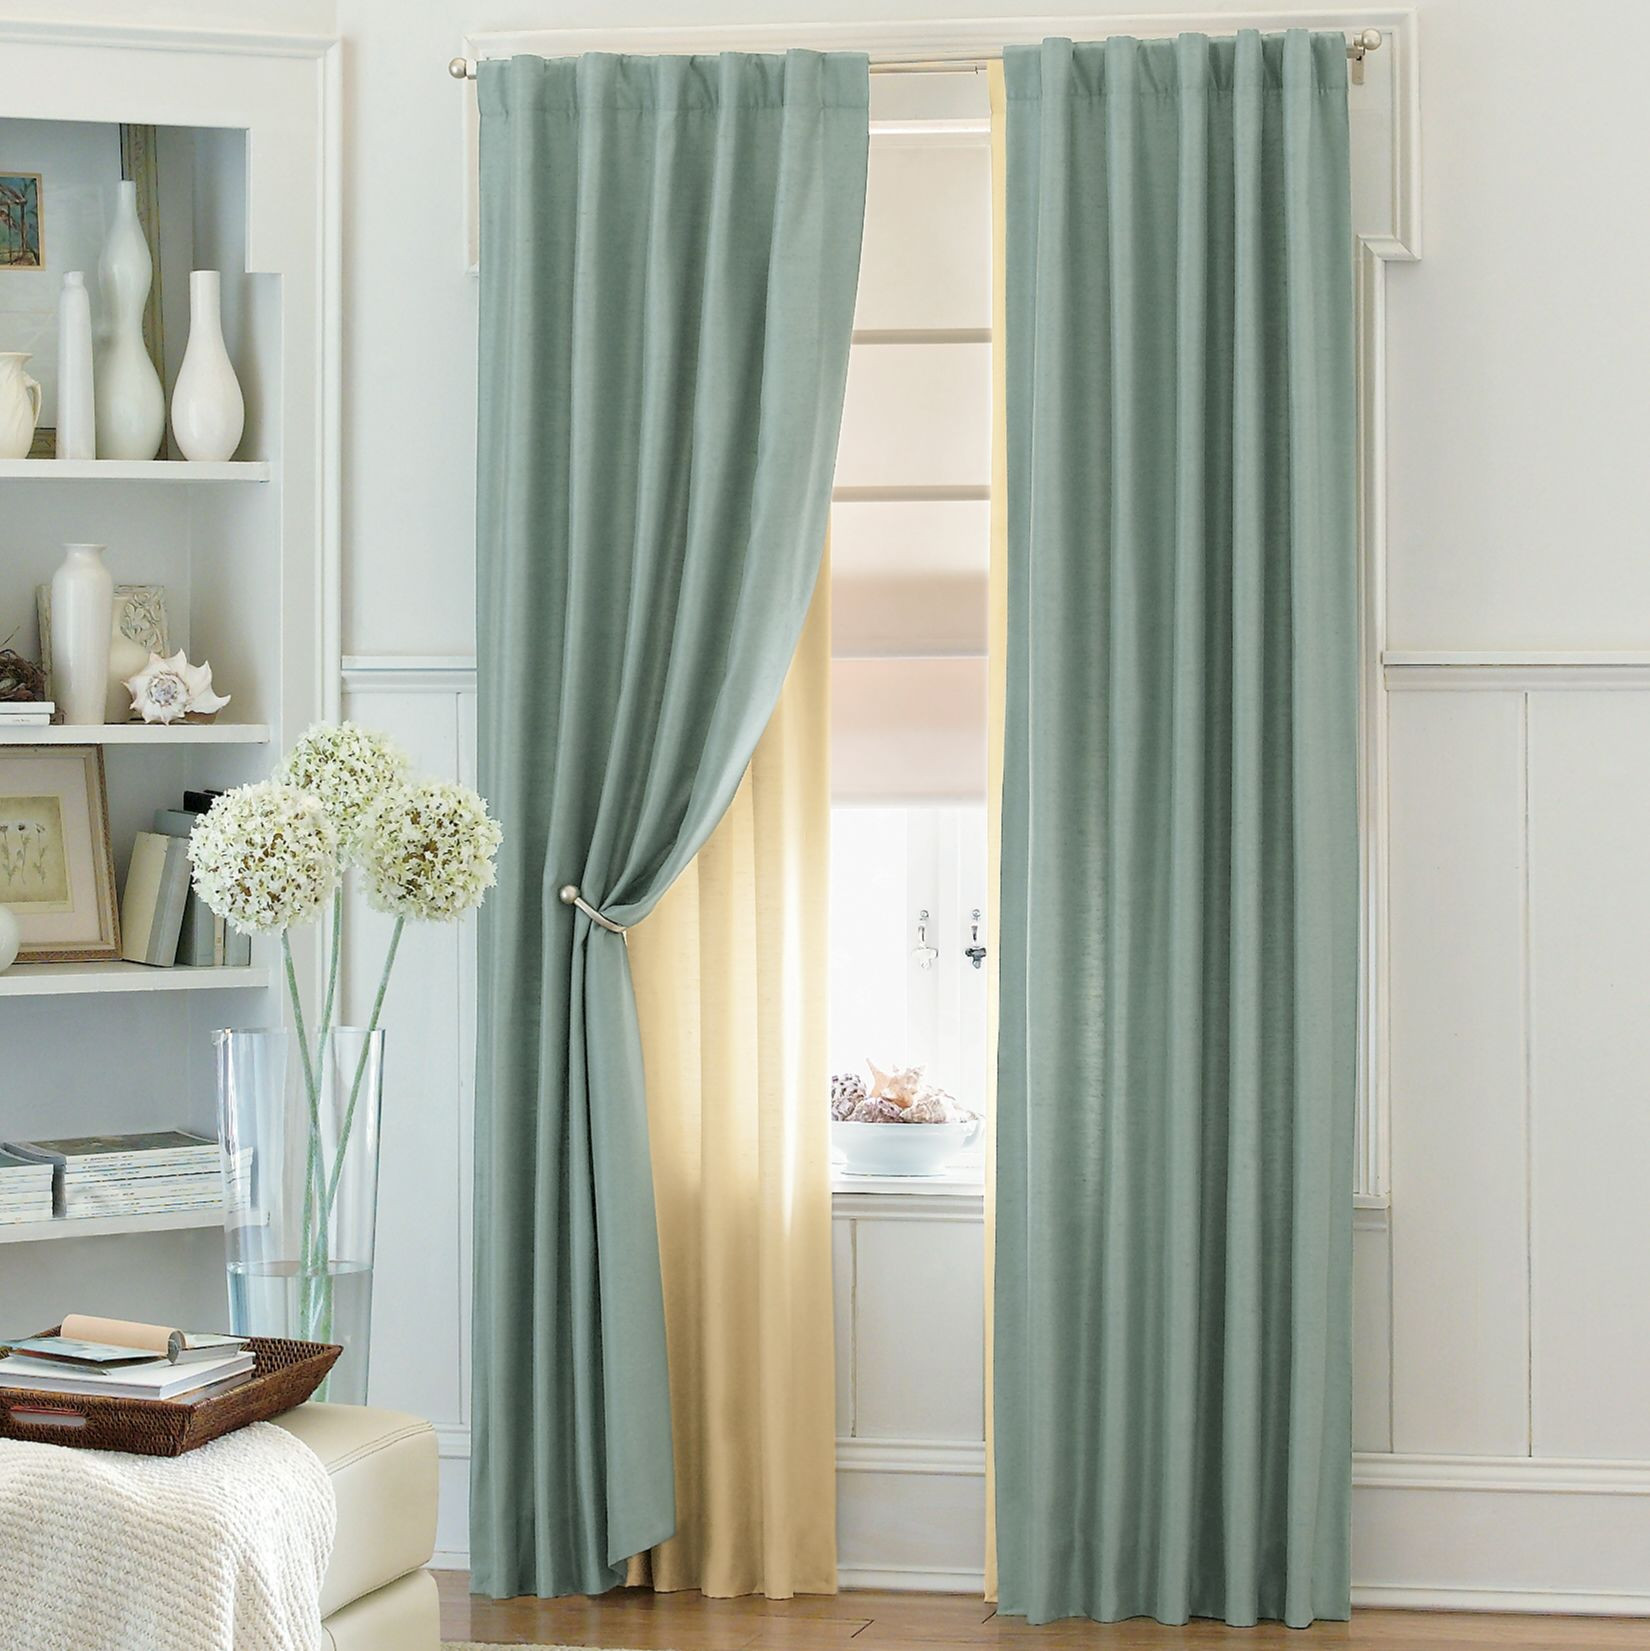 Curtain For Small Bedroom Window
 Elegant and Playful Window Treatment for Small Windows